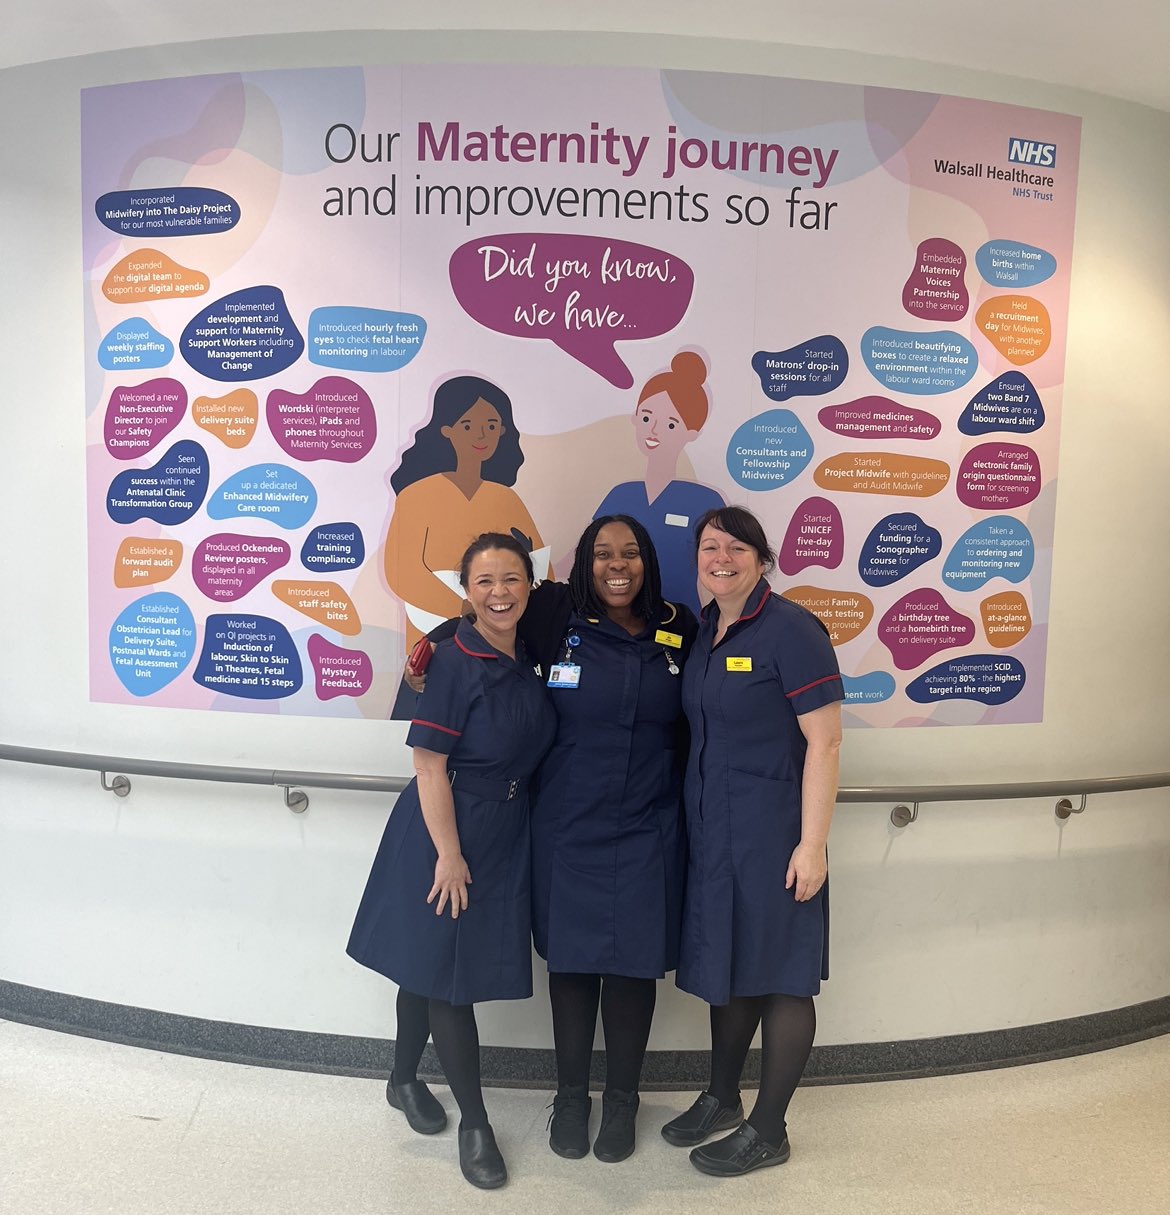 A snapshot of some of Walsall Maternity Services' improvements